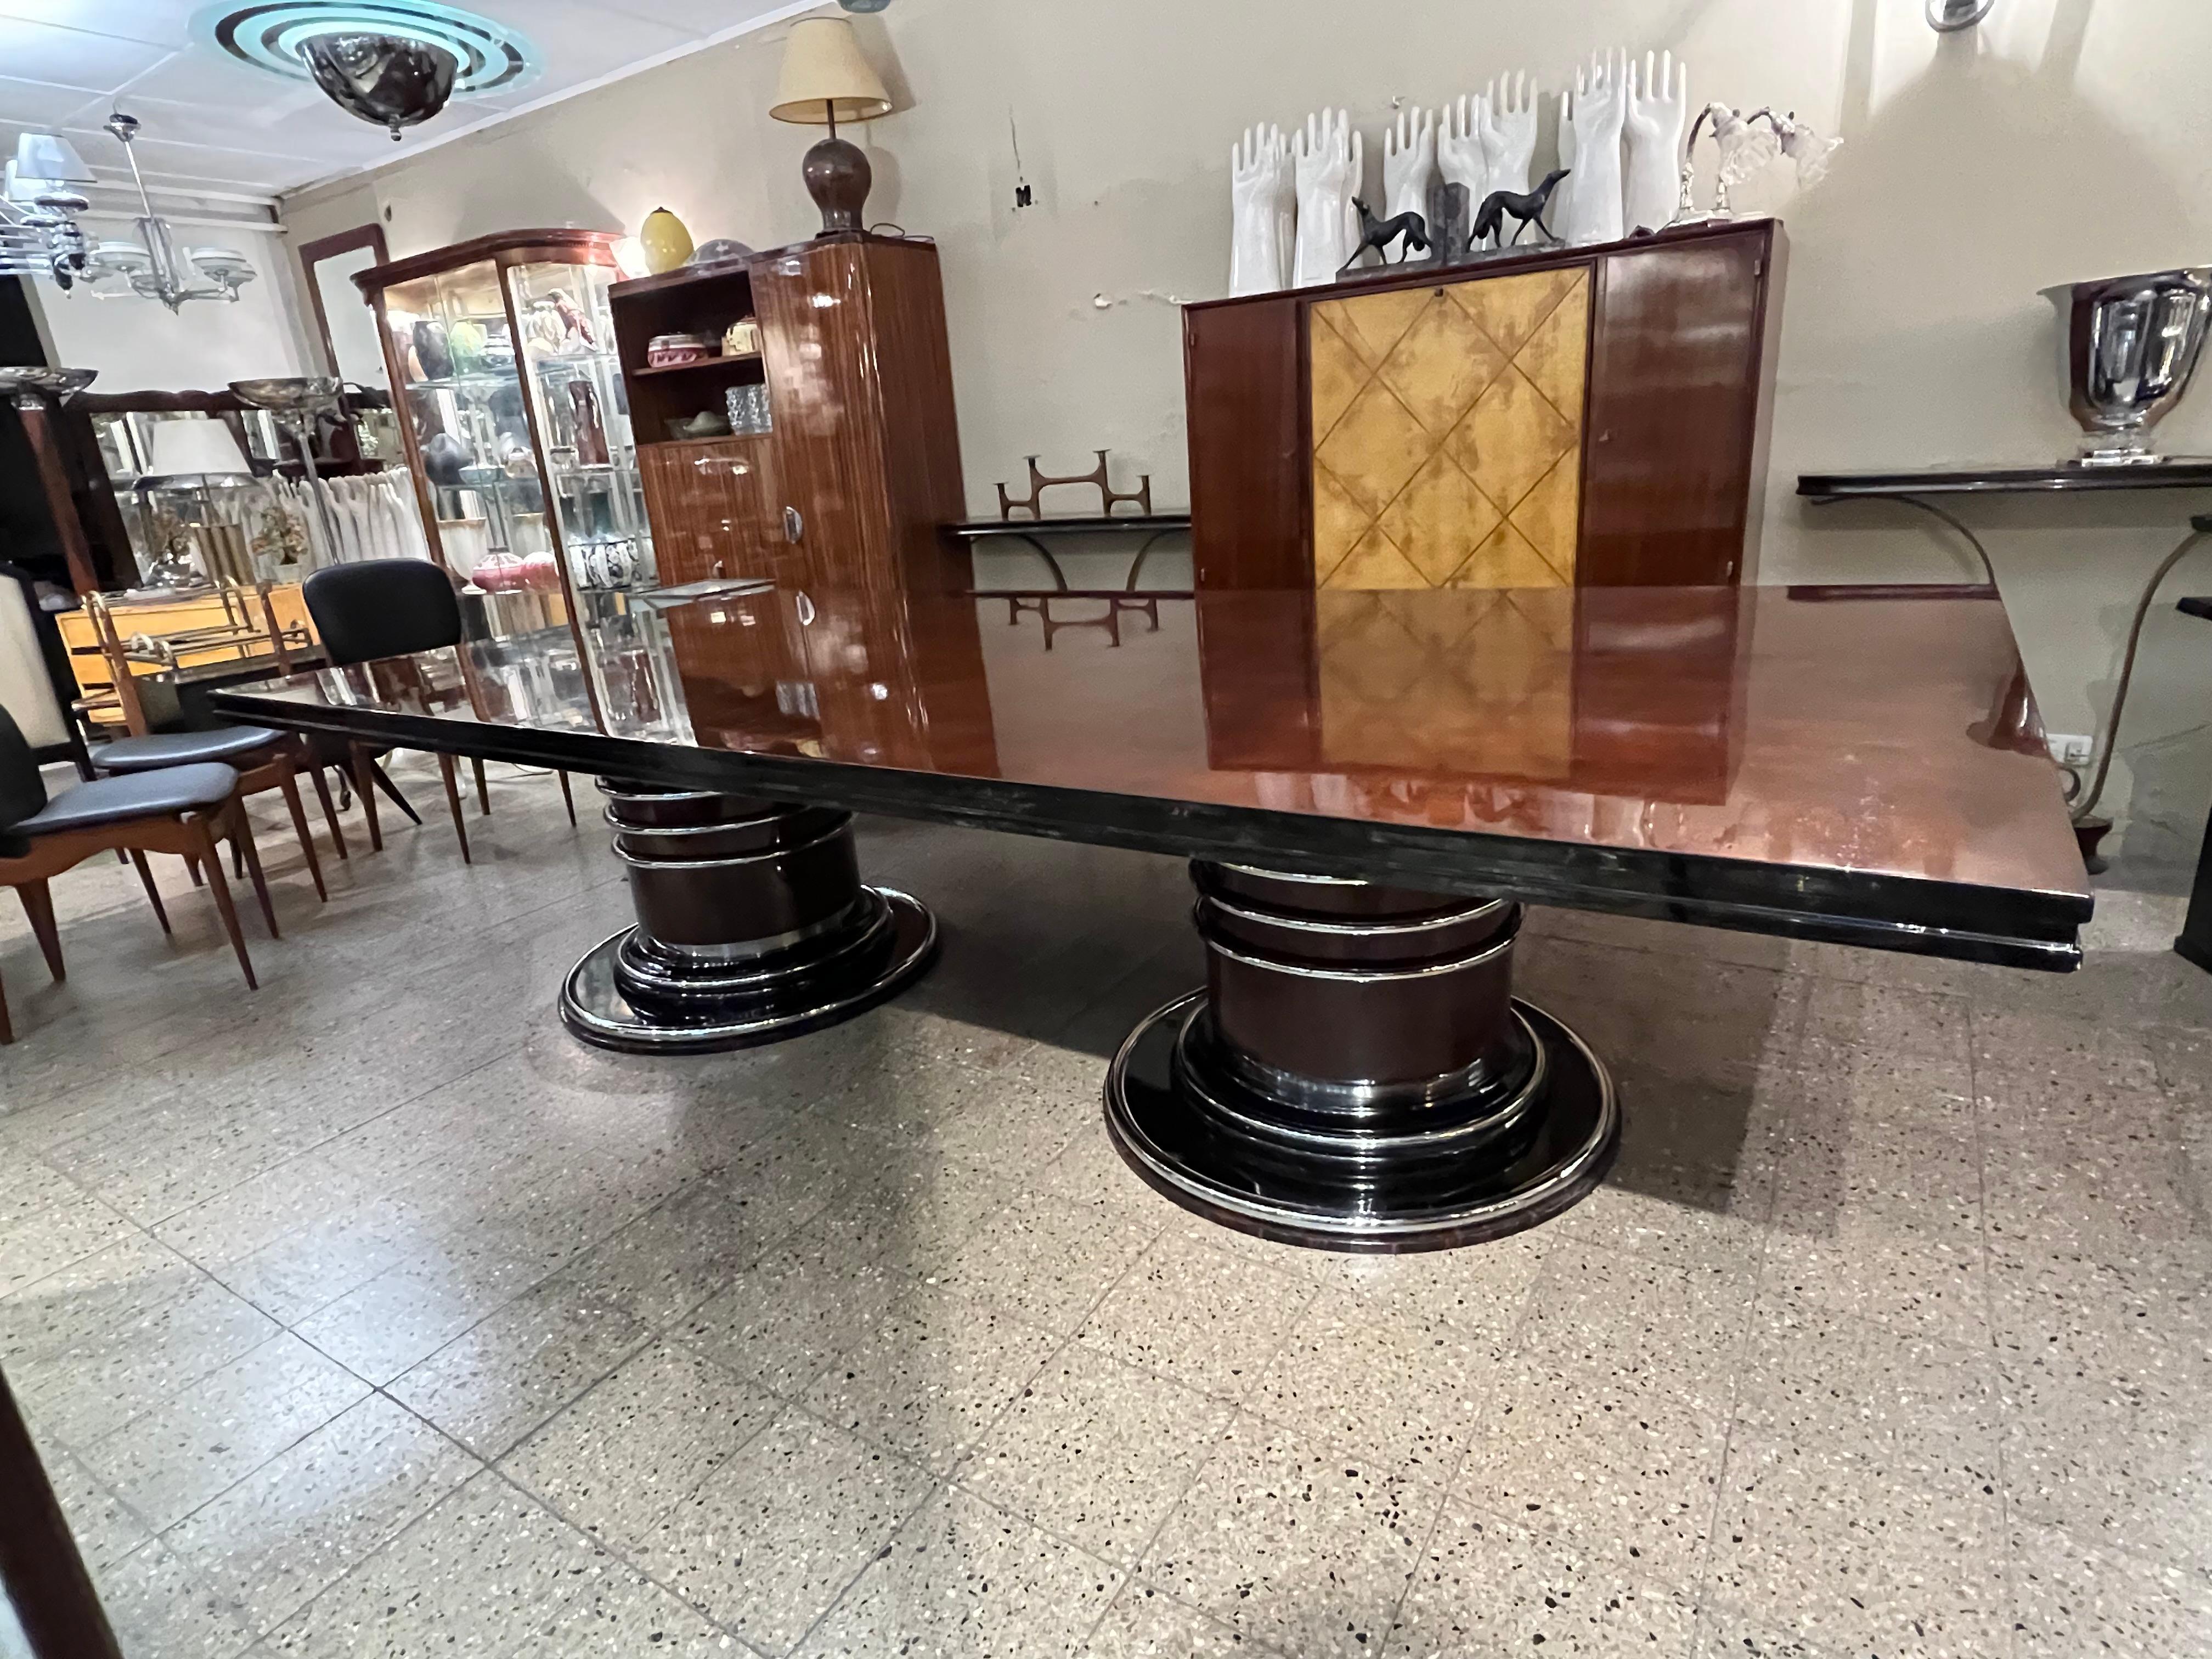 French Amaizing Art Deco Table, '12 Persons', 1920, France in Chrome Steel and Wood For Sale